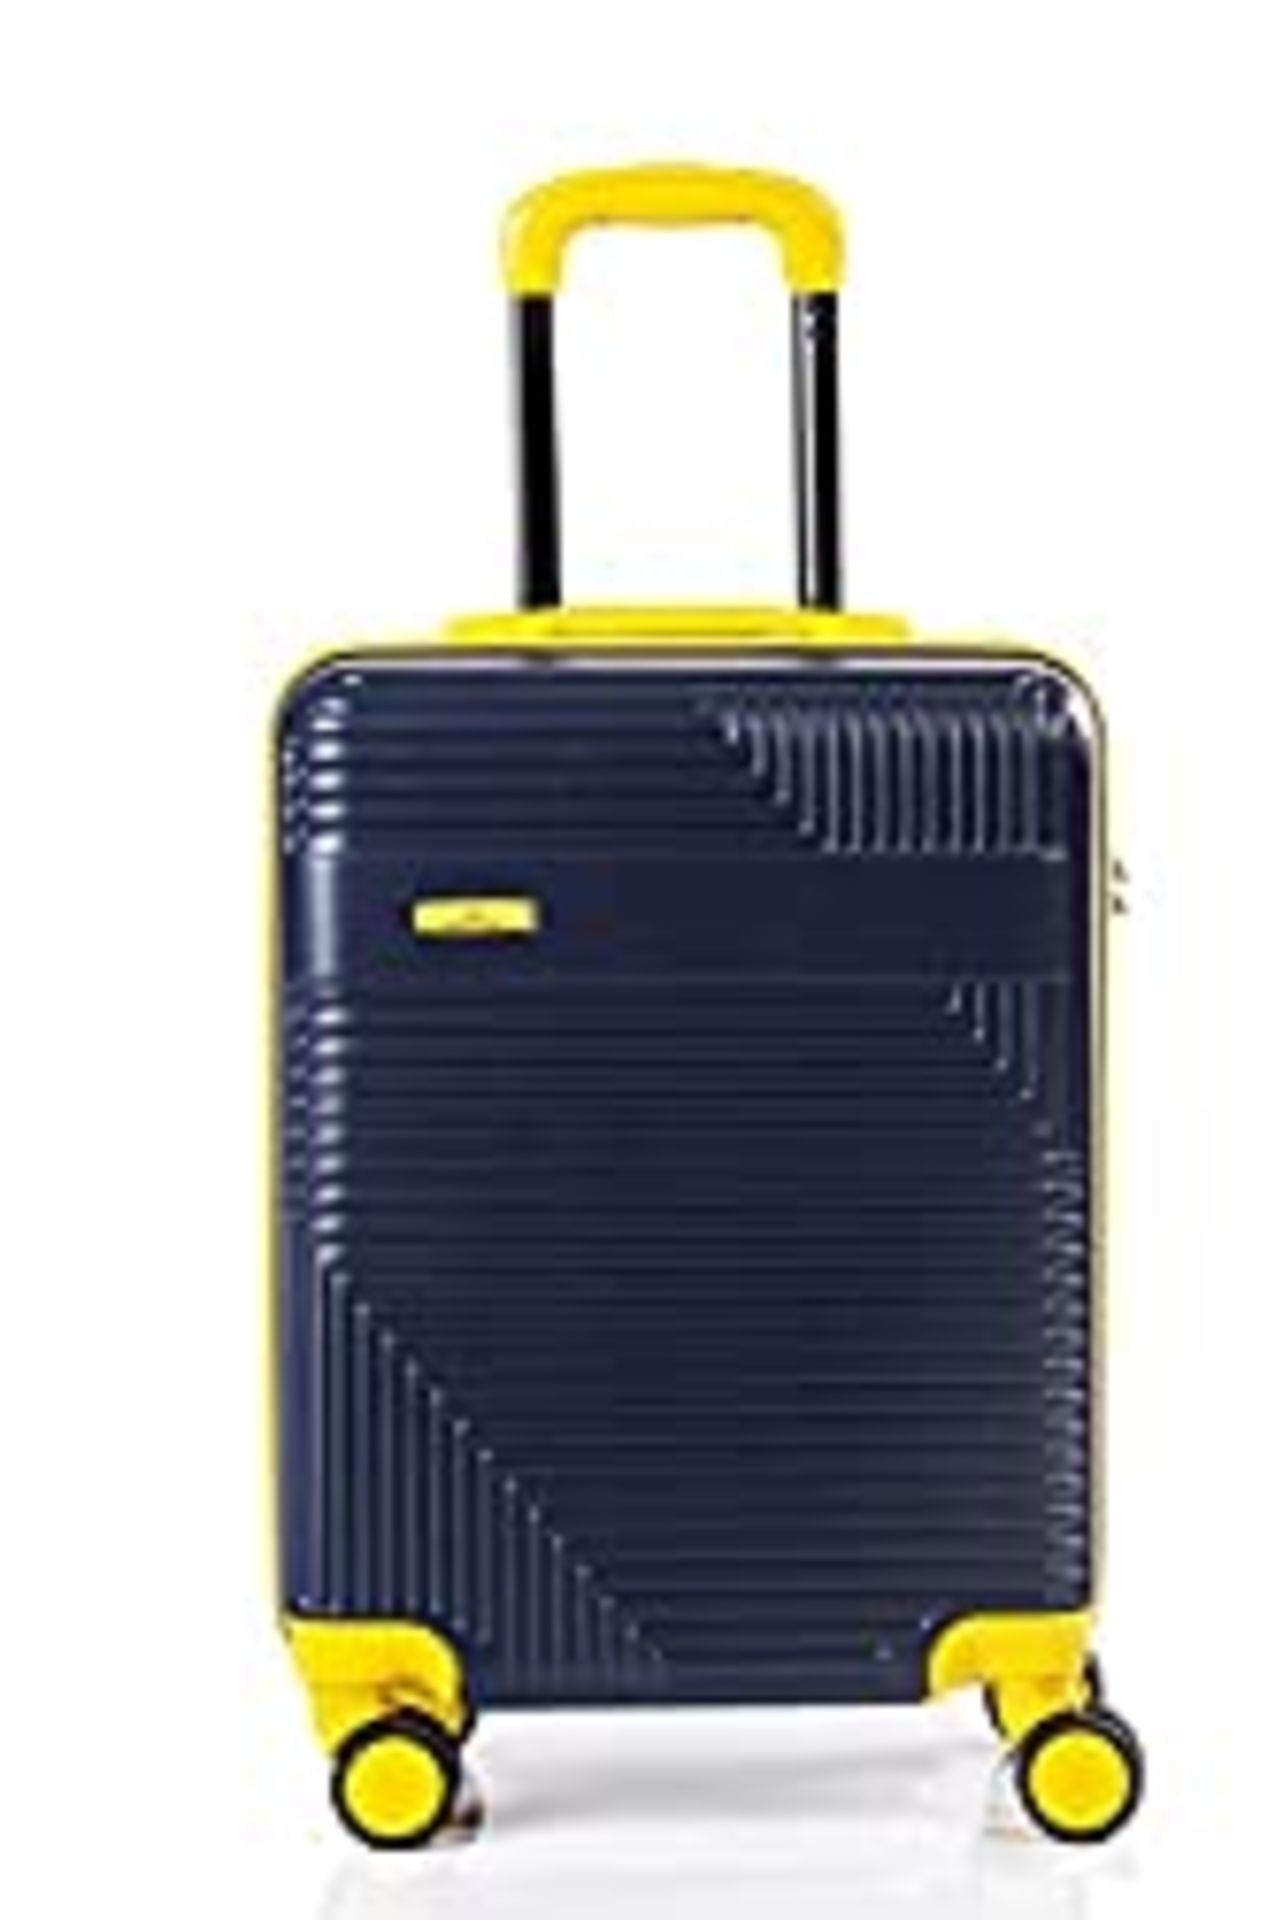 RRP £74.99 North CASE ABS 8 Wheels CCS Suitcase Luggage Trolley